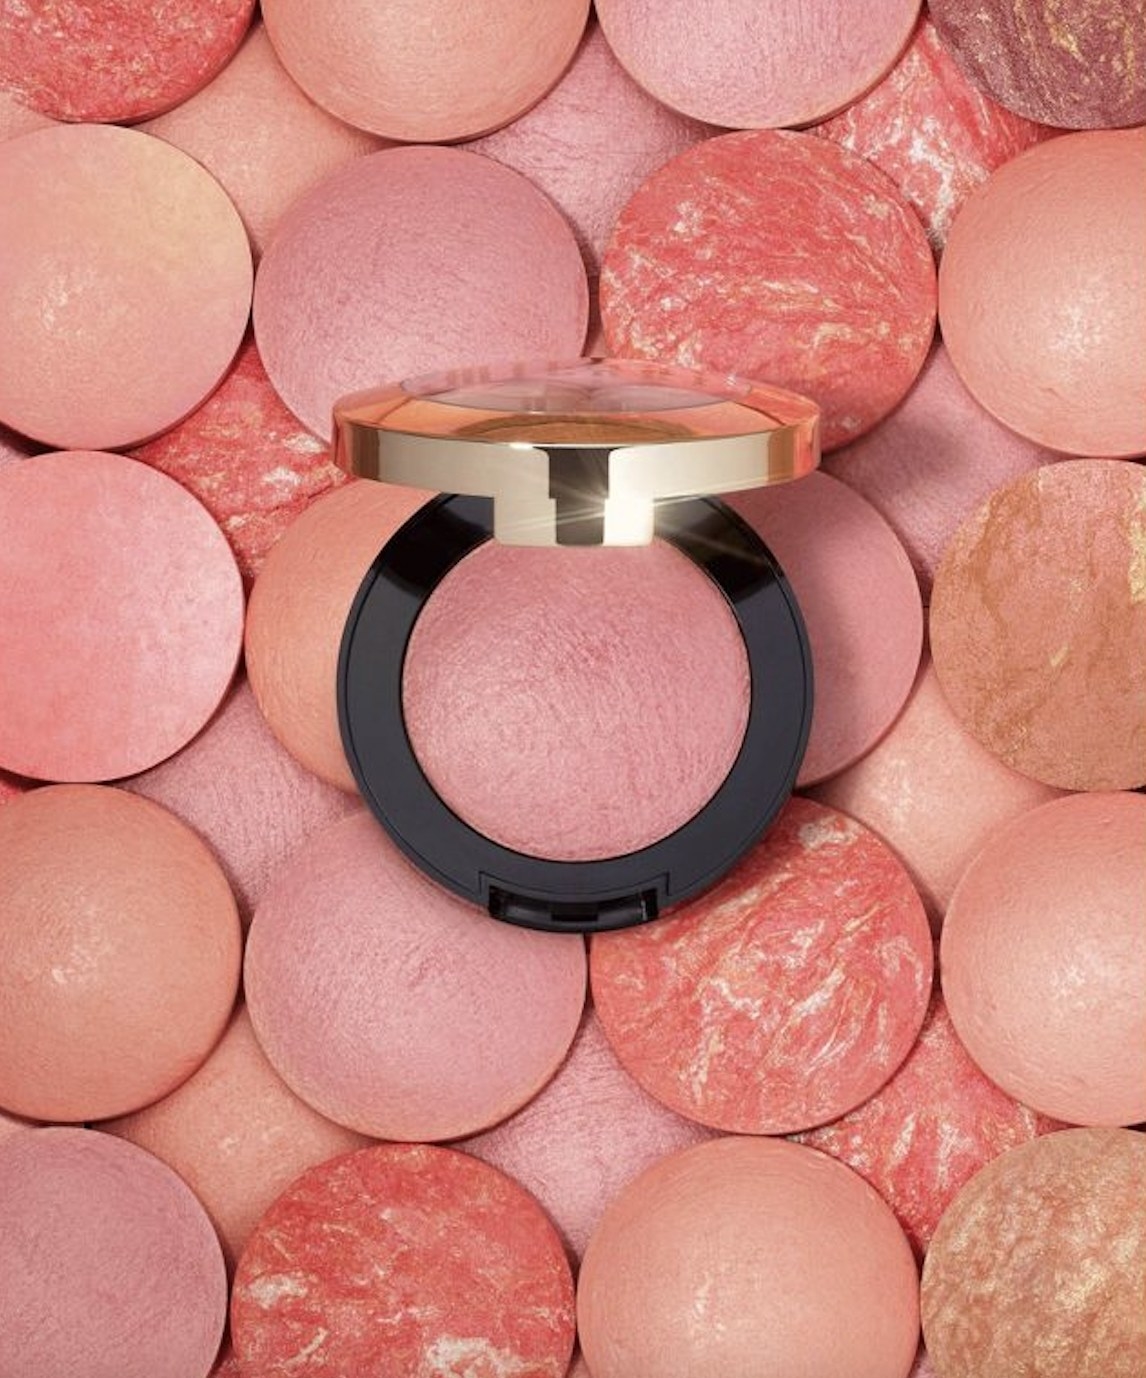 A blush compact with several shades